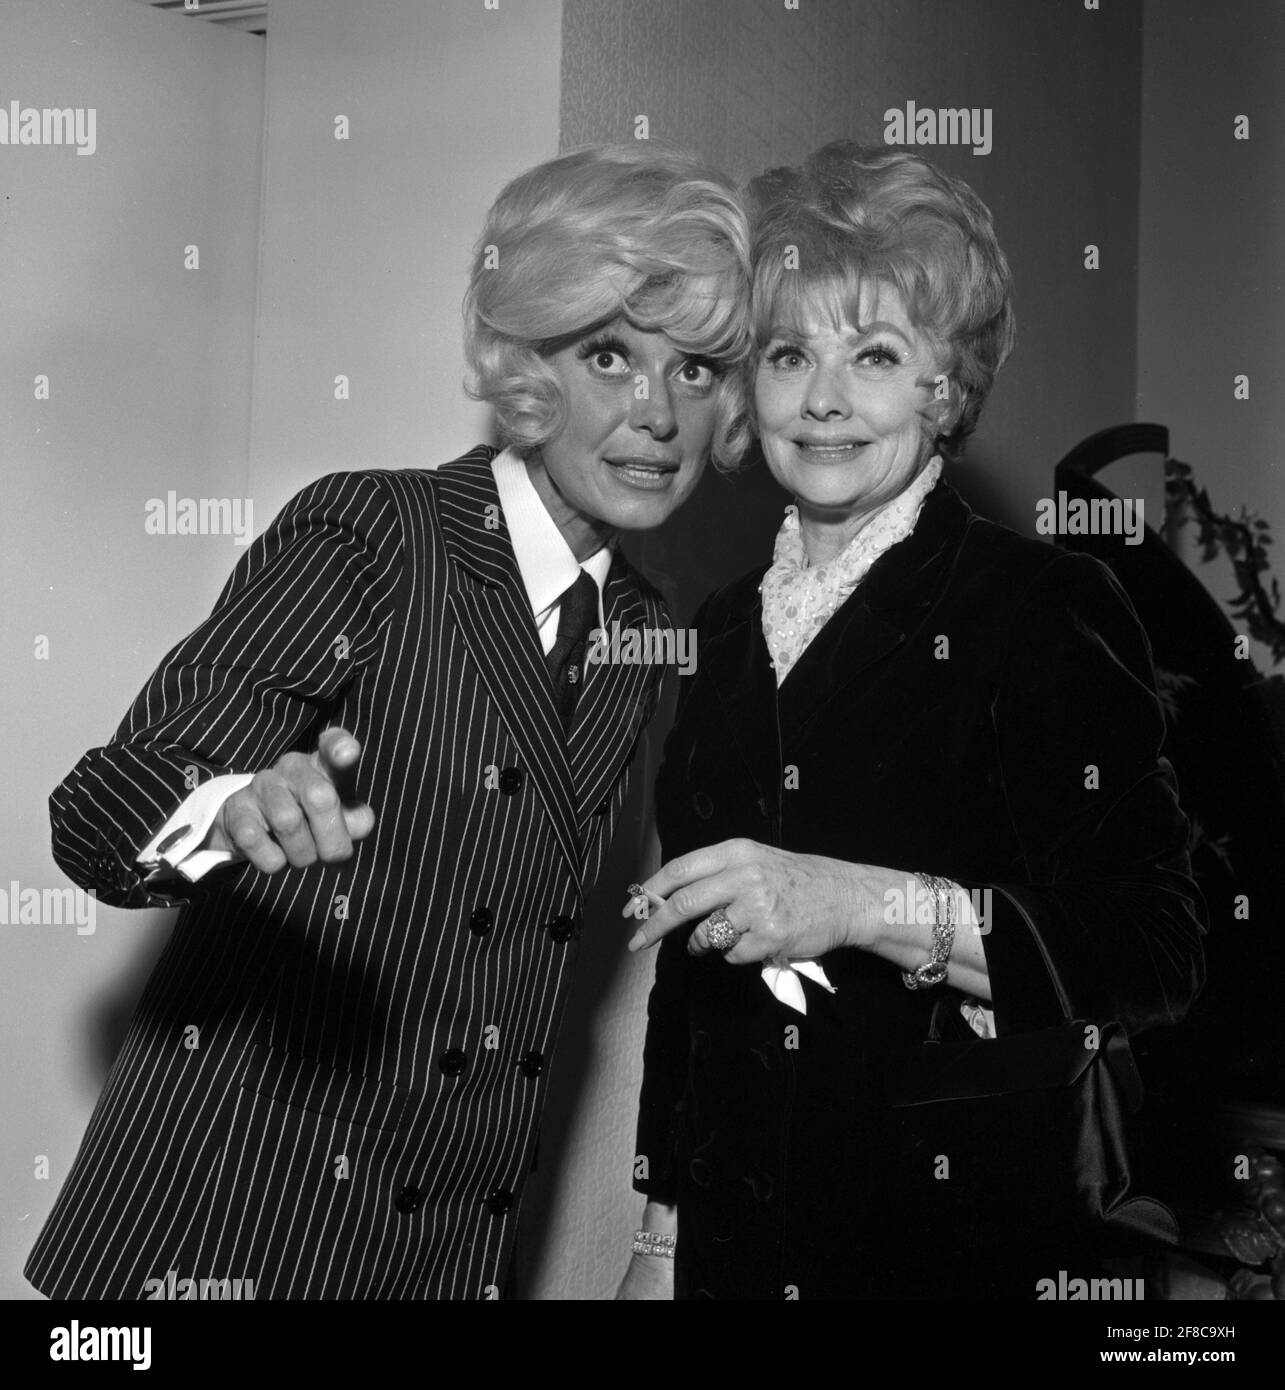 Carol channing and Lucille Ball Circa 1970's Credit: Ralph Dominguez ...